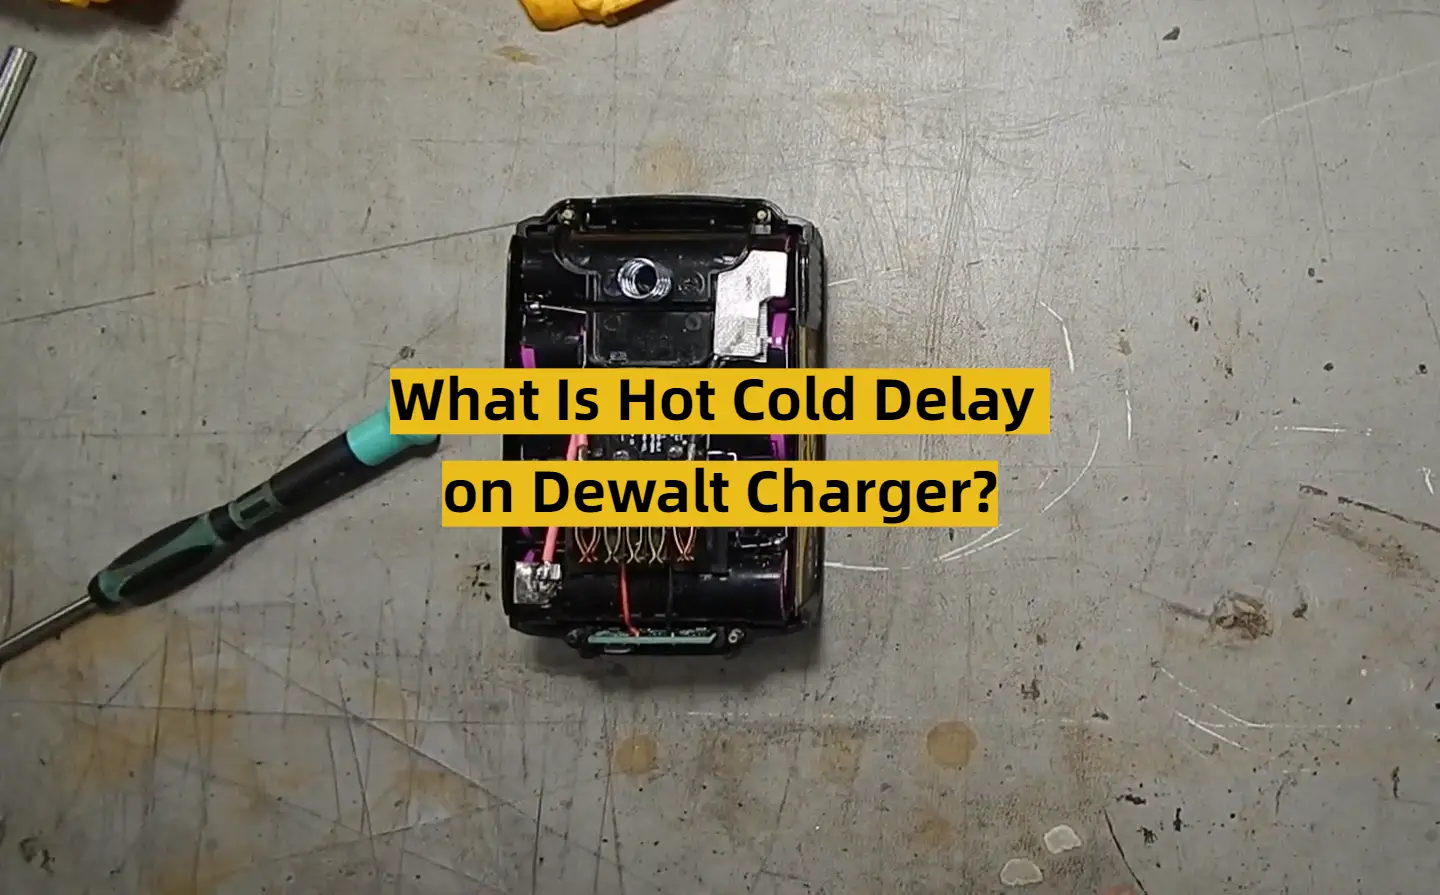 What Is Hot Cold Delay on Dewalt Charger?